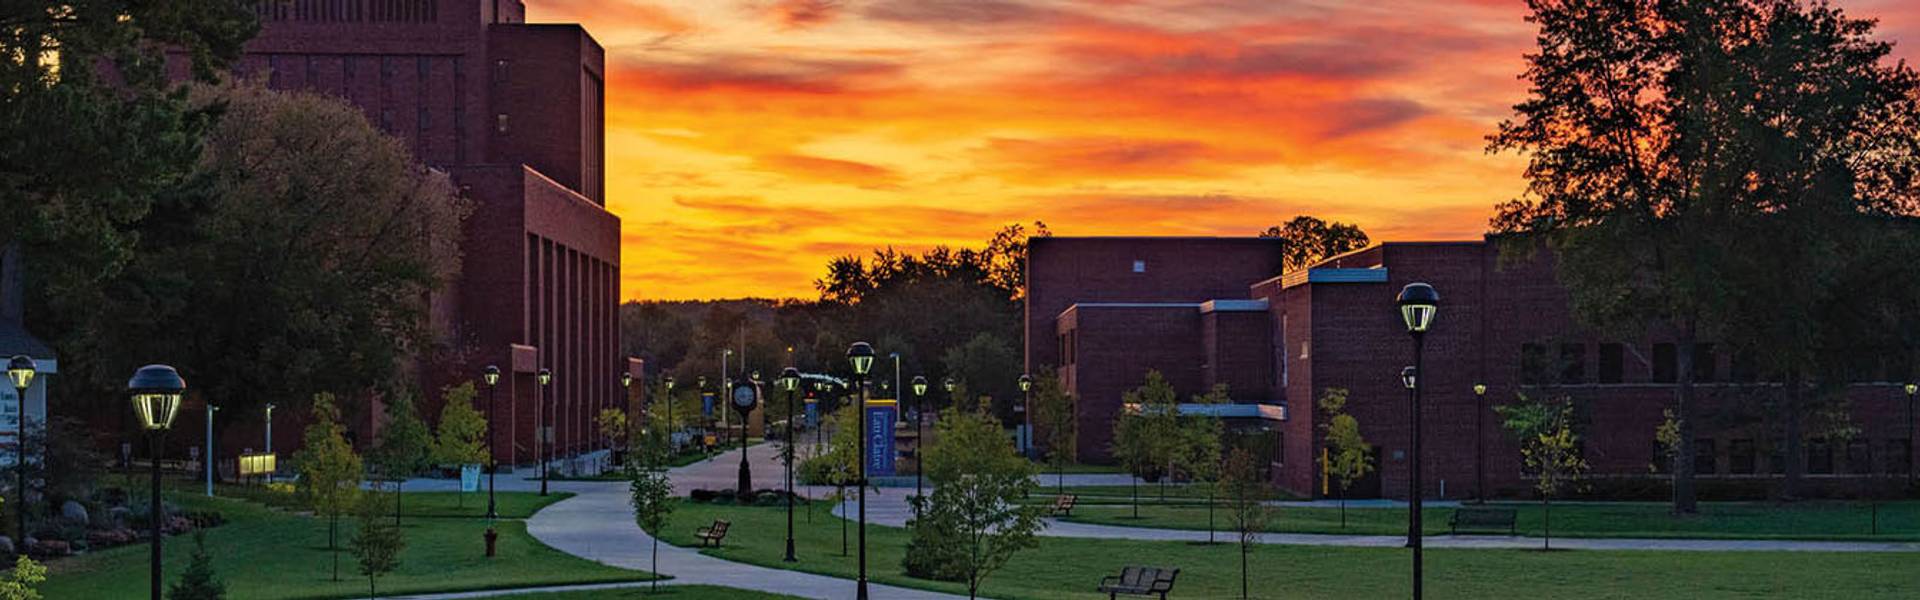 A photo of UW-Eau Claire Campus at sunset